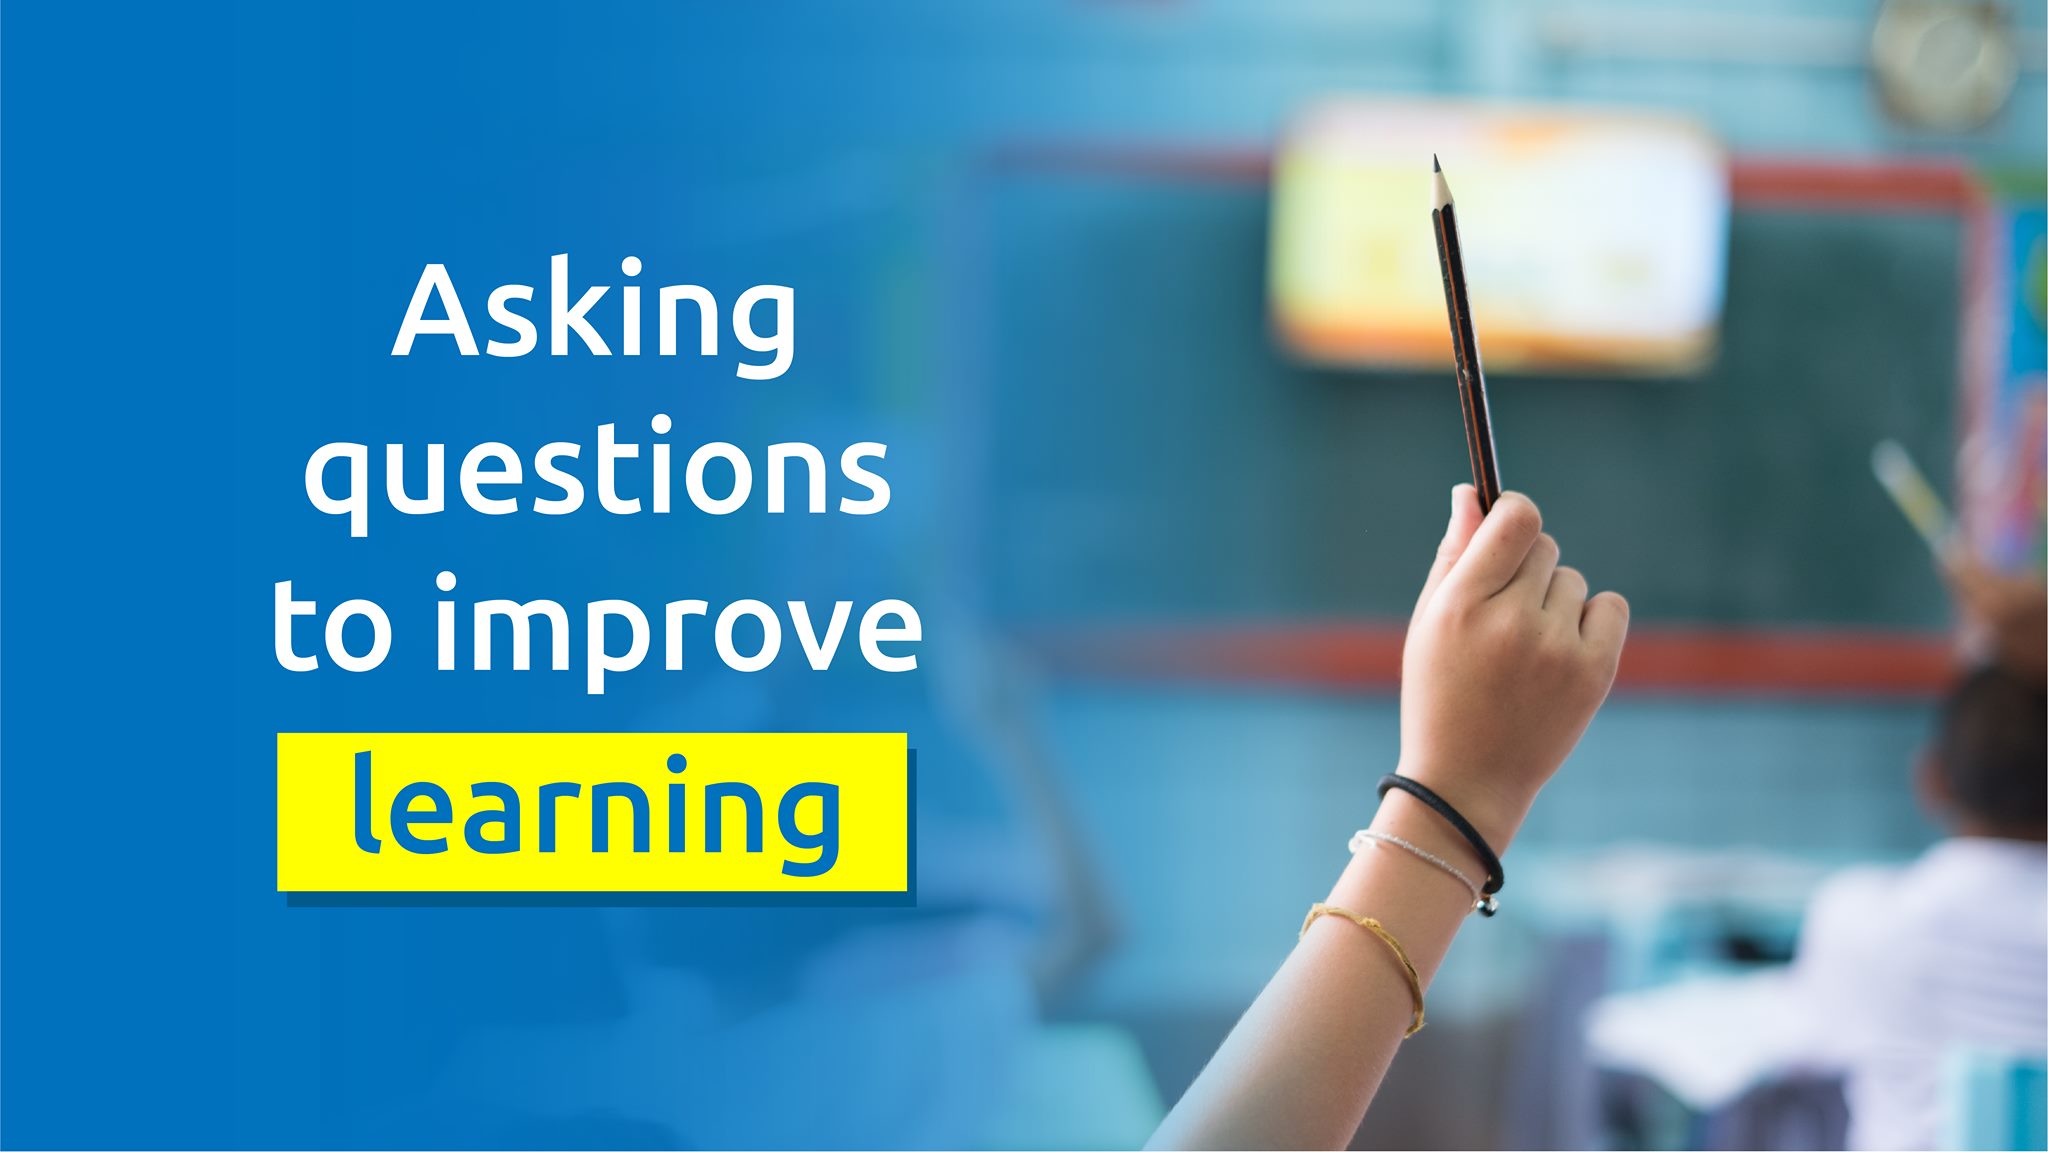 Asking questions to improve learning